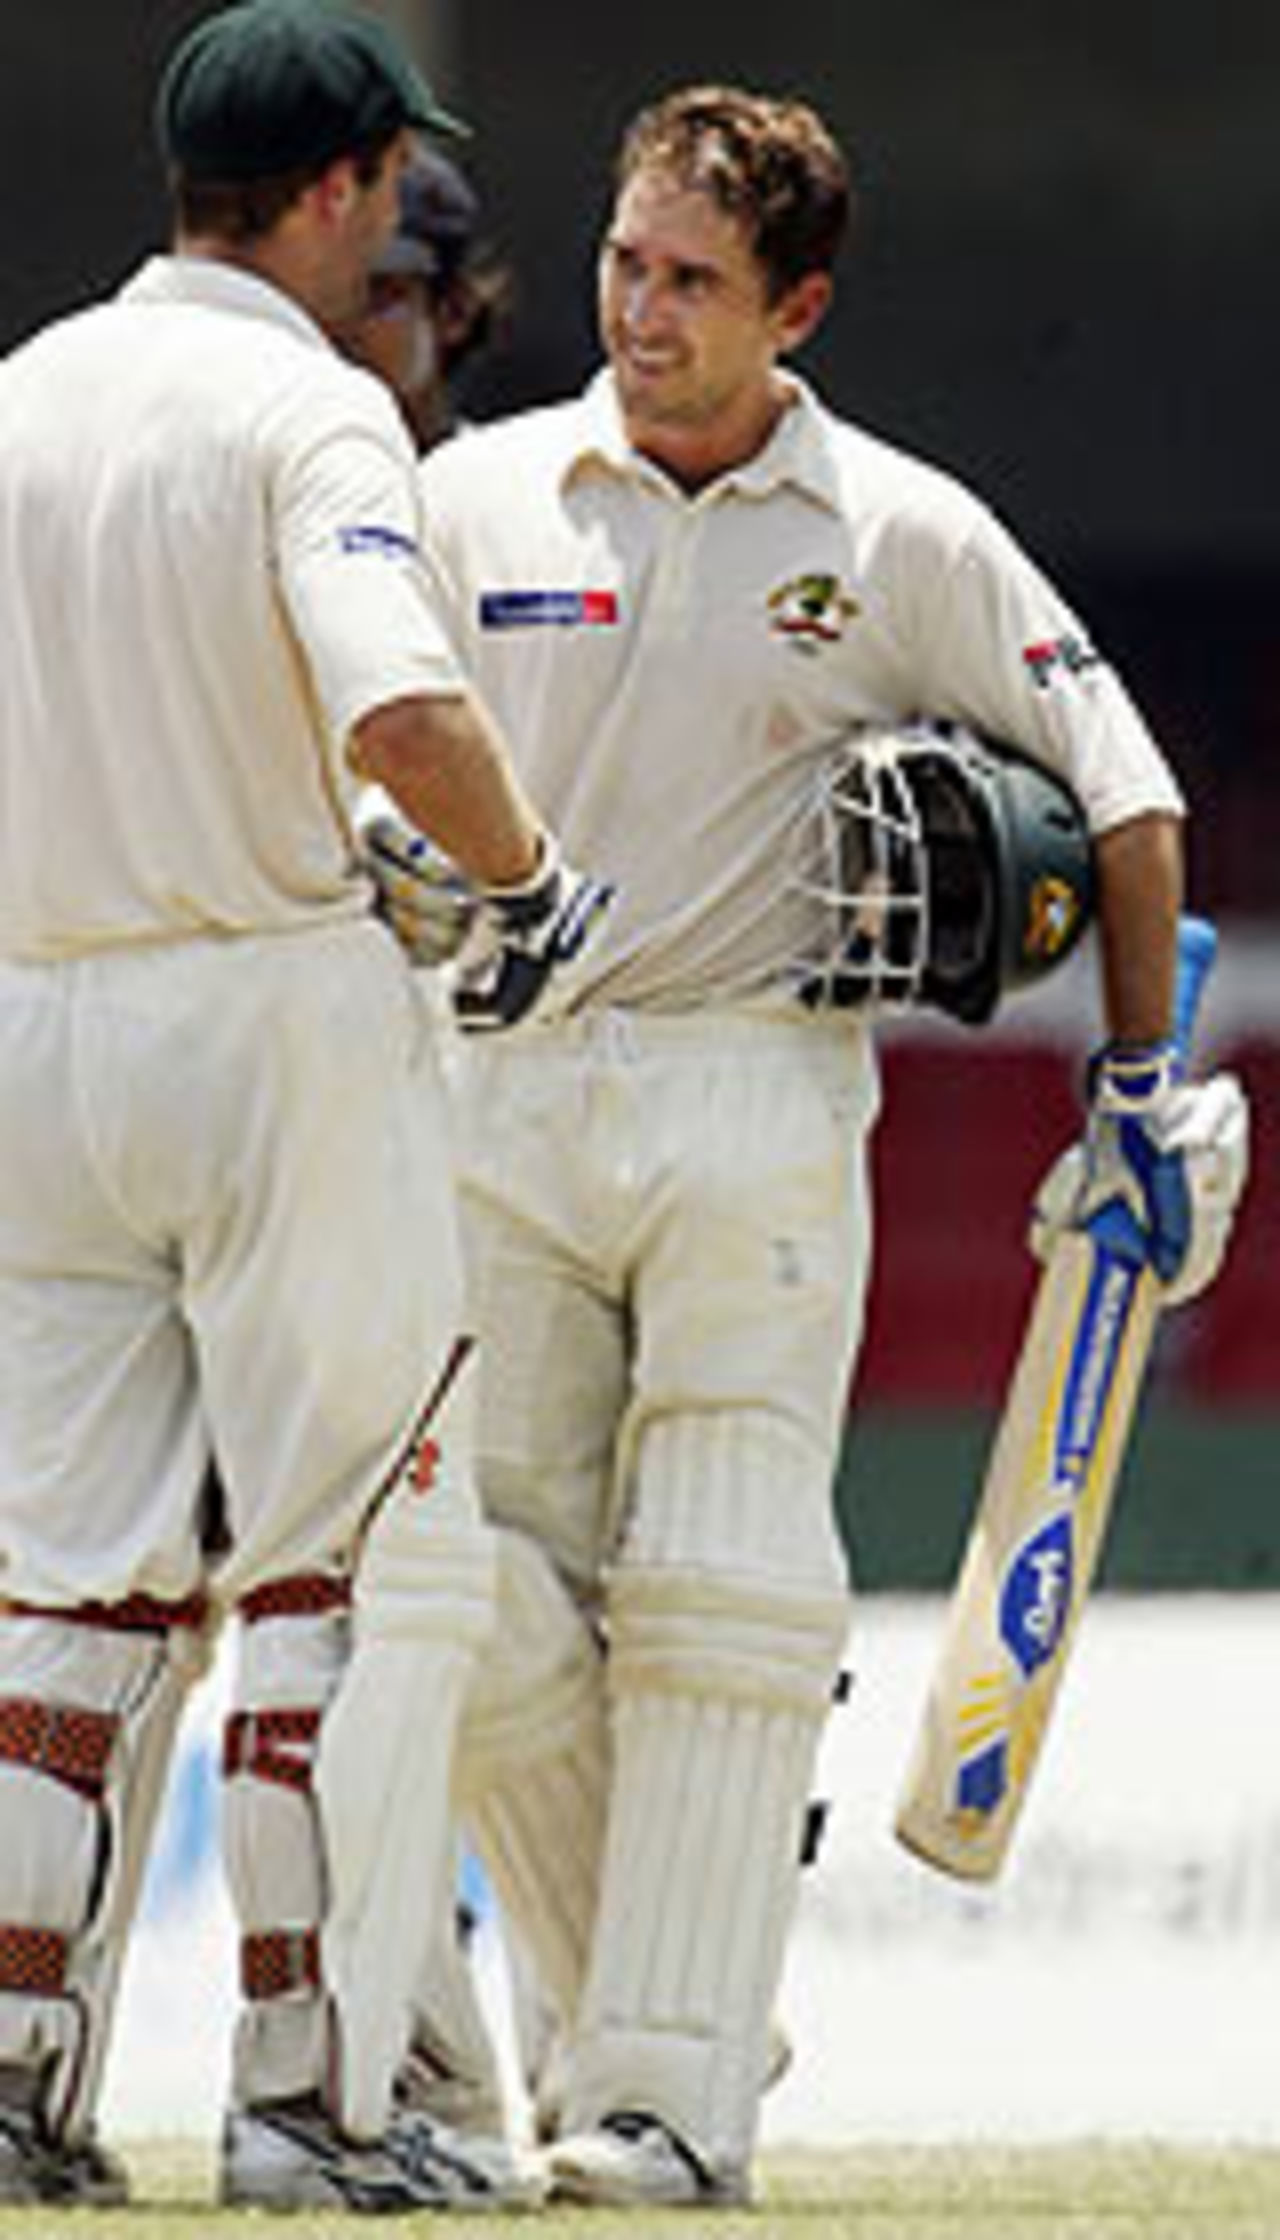 Justin Langer is congratulated by Simon Katich, Sri Lanka v Australia, 3rd Test, Colombo, 4th day, March 27, 2004